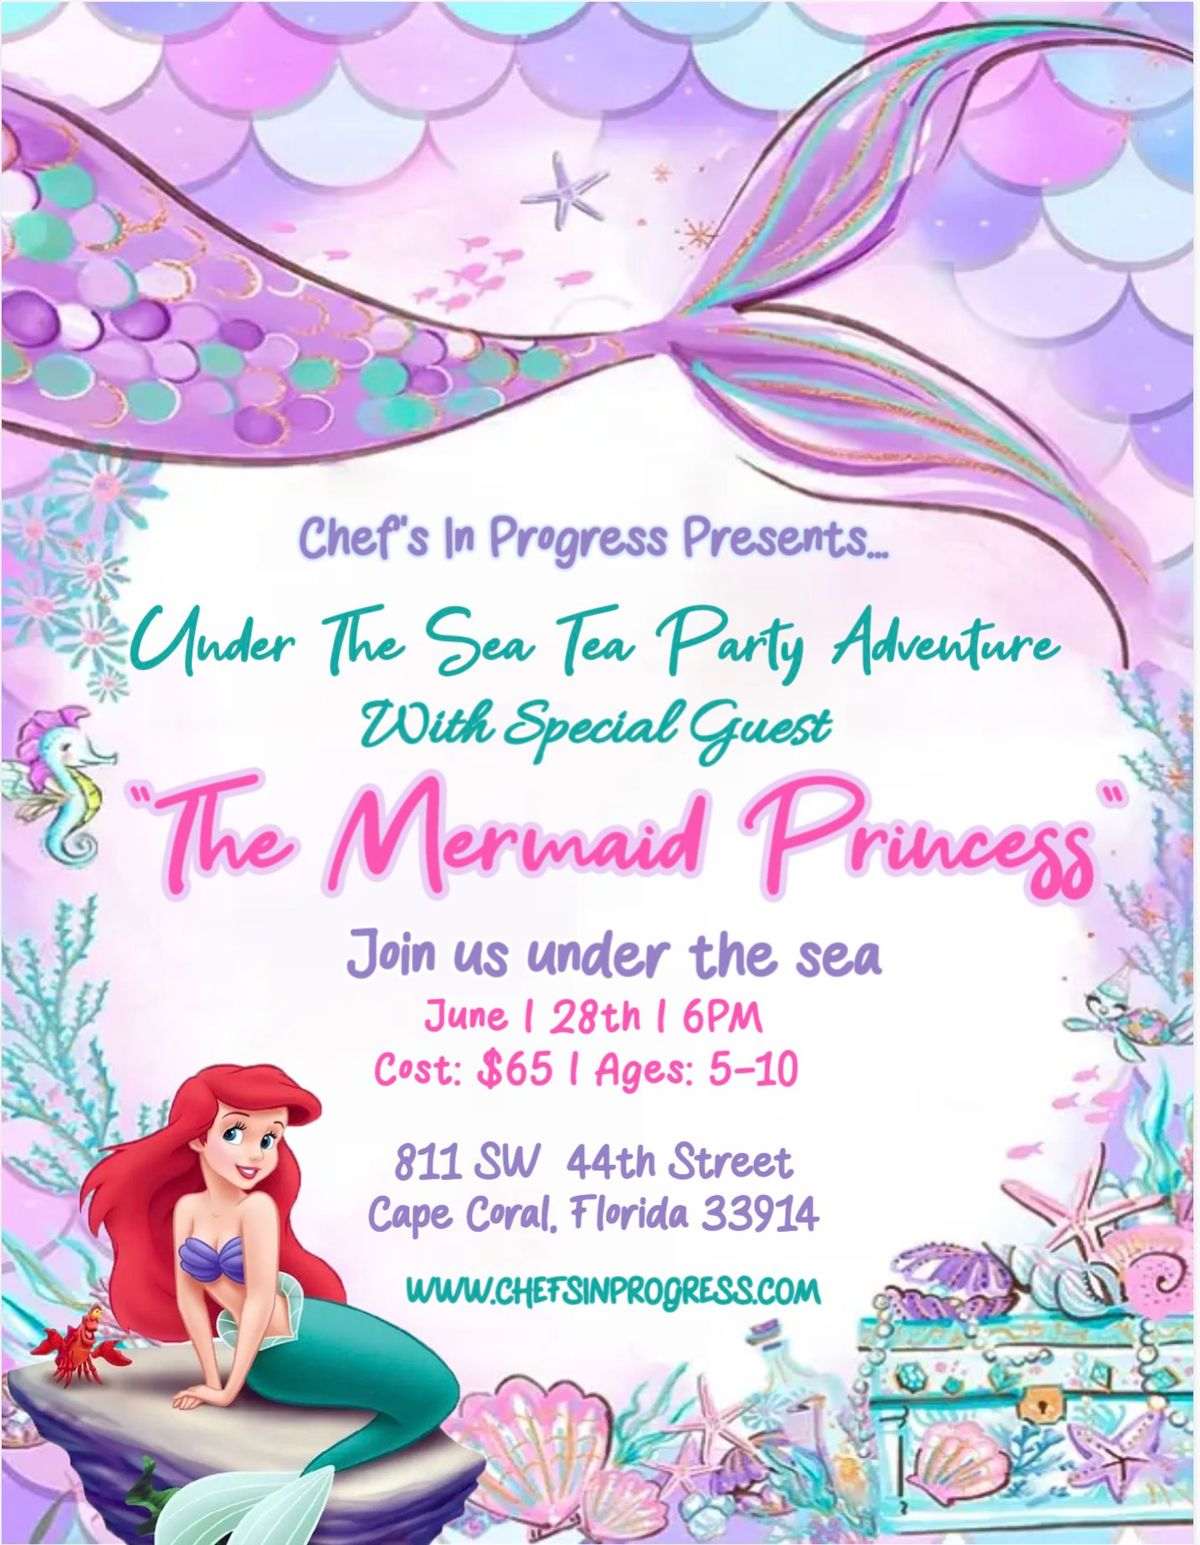 Under The Sea Tea Party Adventuring With Special Guest "The Mermaid Princess"